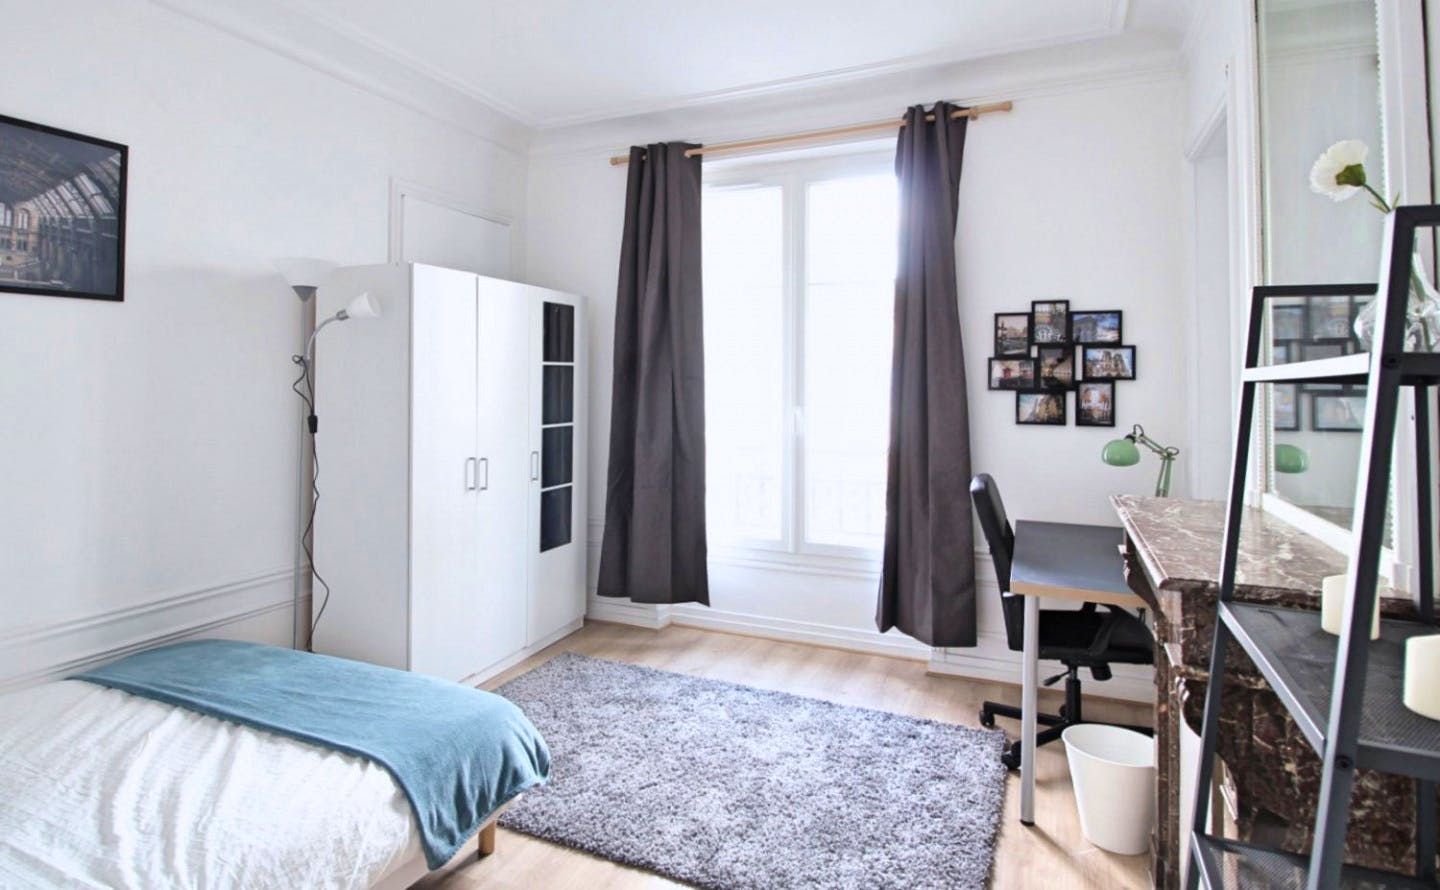 Beautiful furnished apartment located in the 18th district of Paris